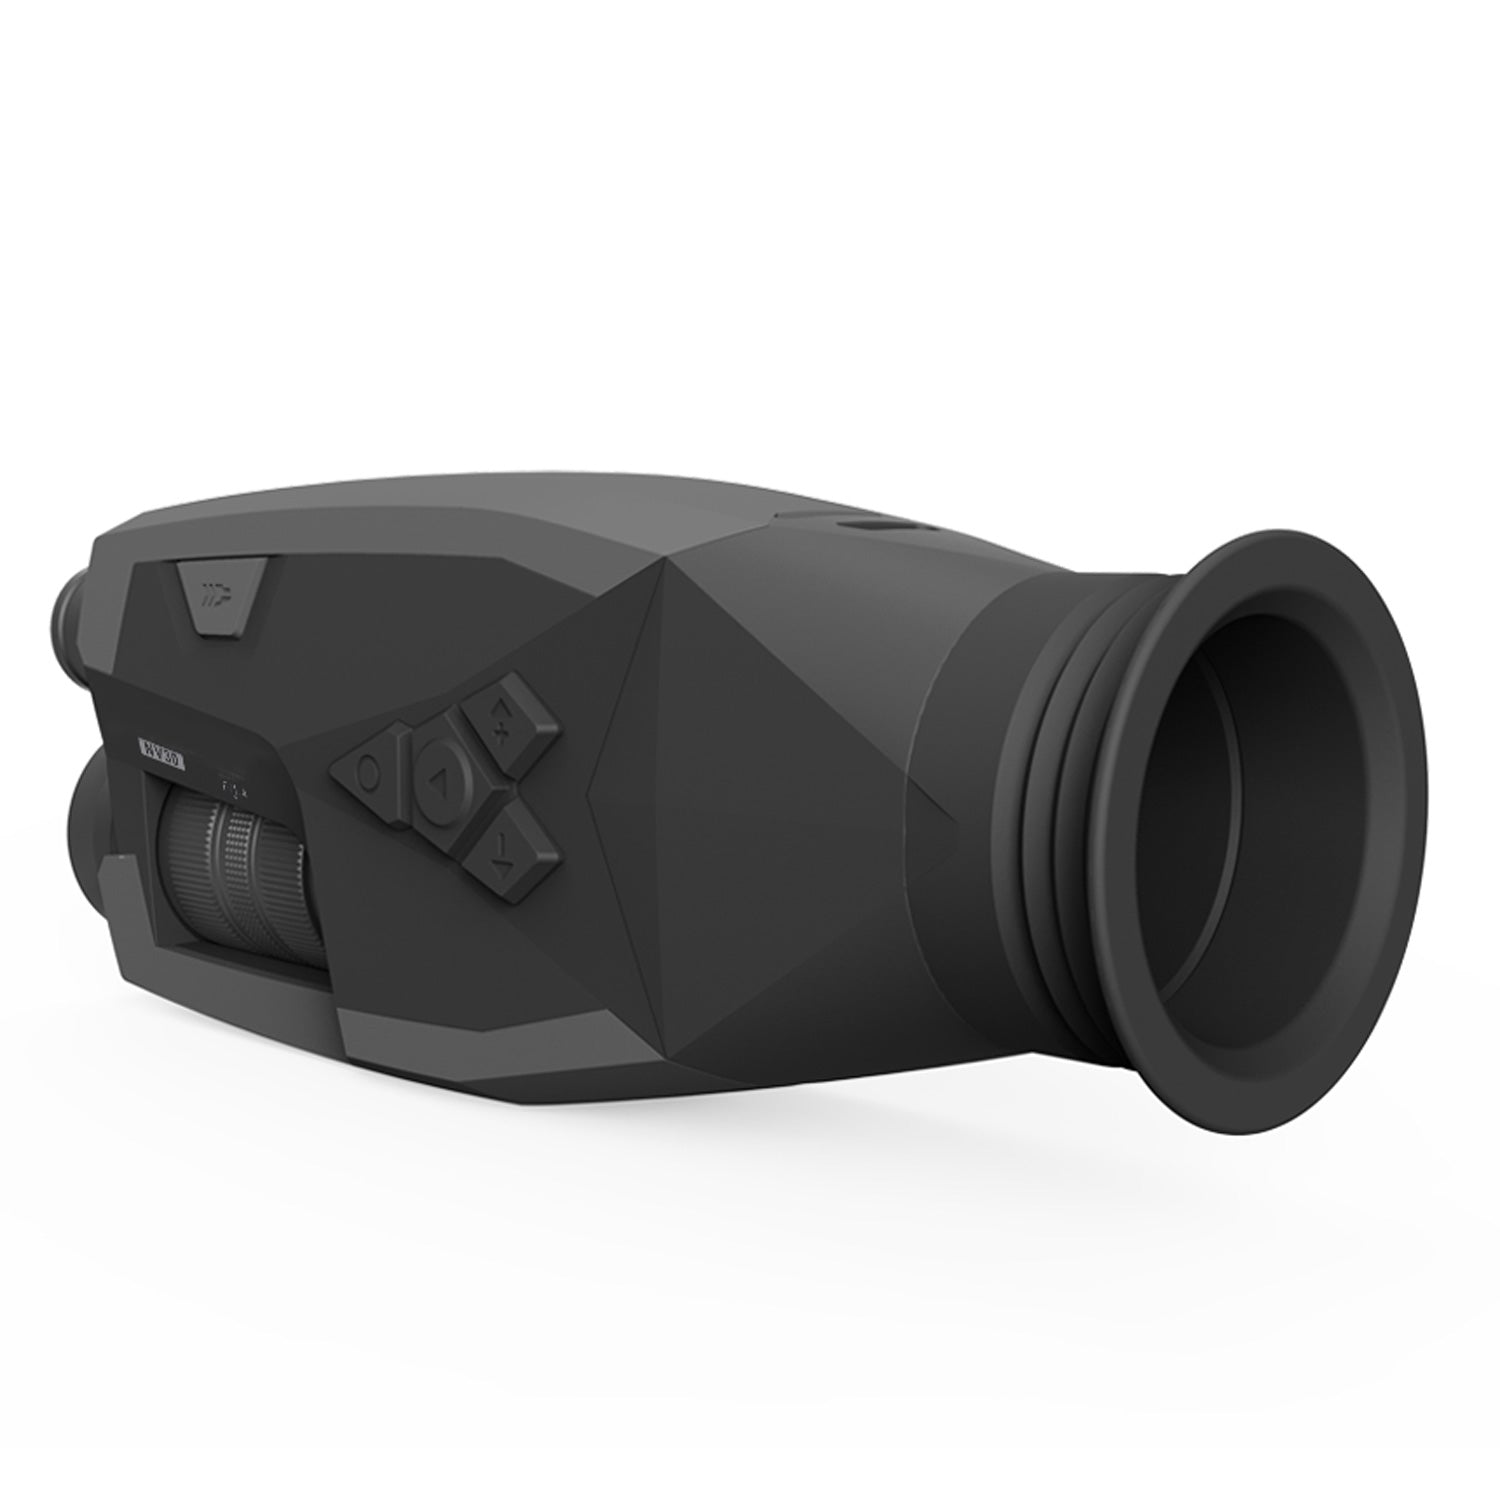 NV30 Infrared Night Vision Monocular with Full-color Mode in Darkness - Mileseeytools